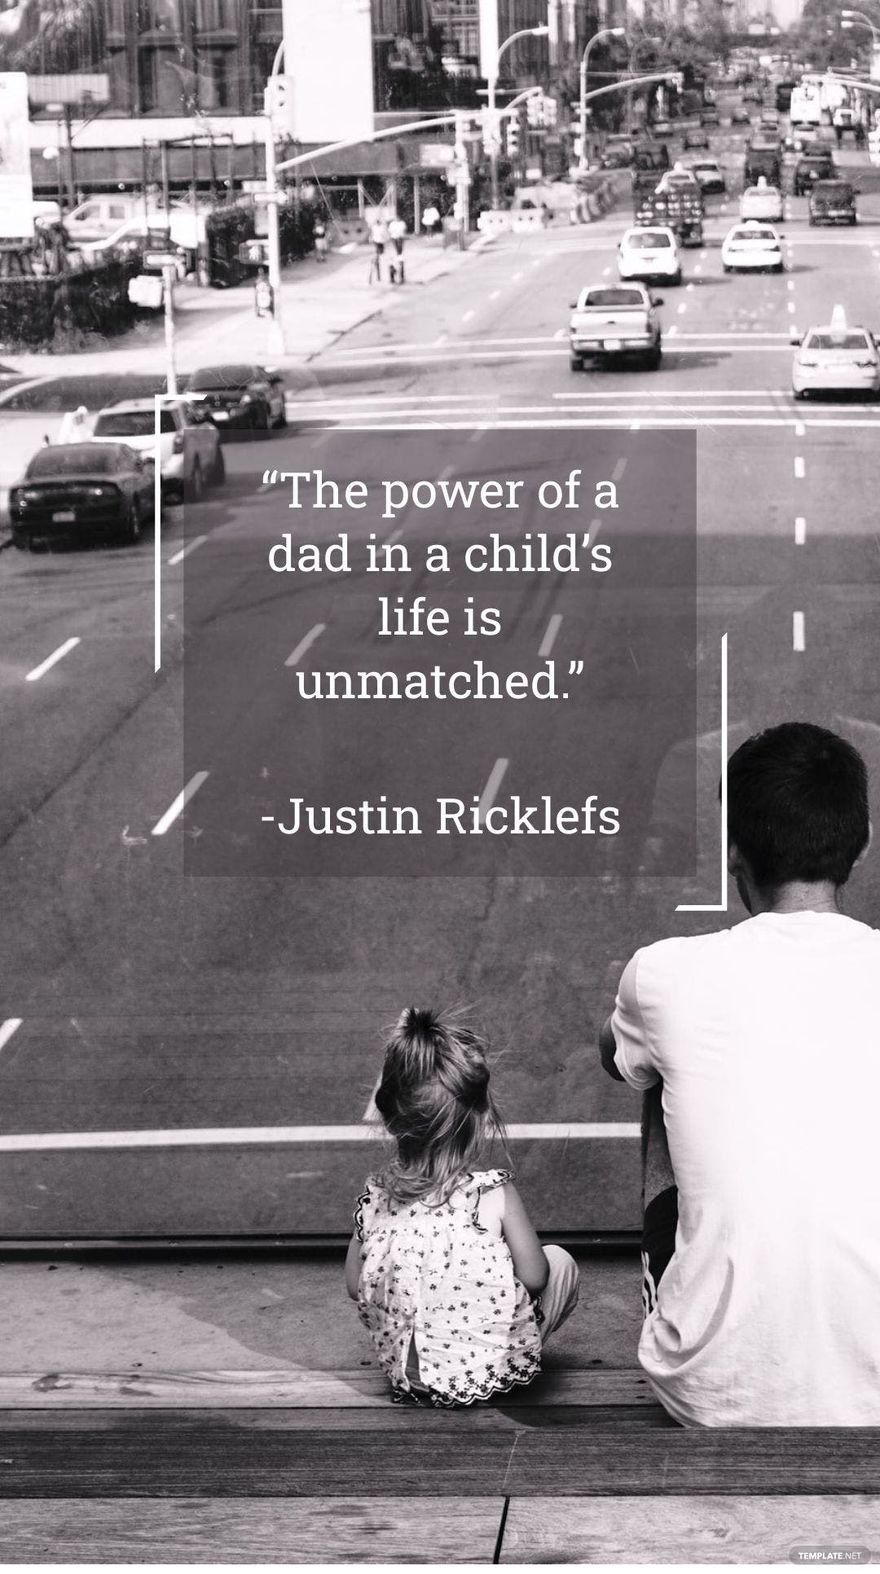 Free Justin Ricklefs - “The power of a dad in a child’s life is unmatched.” in JPG